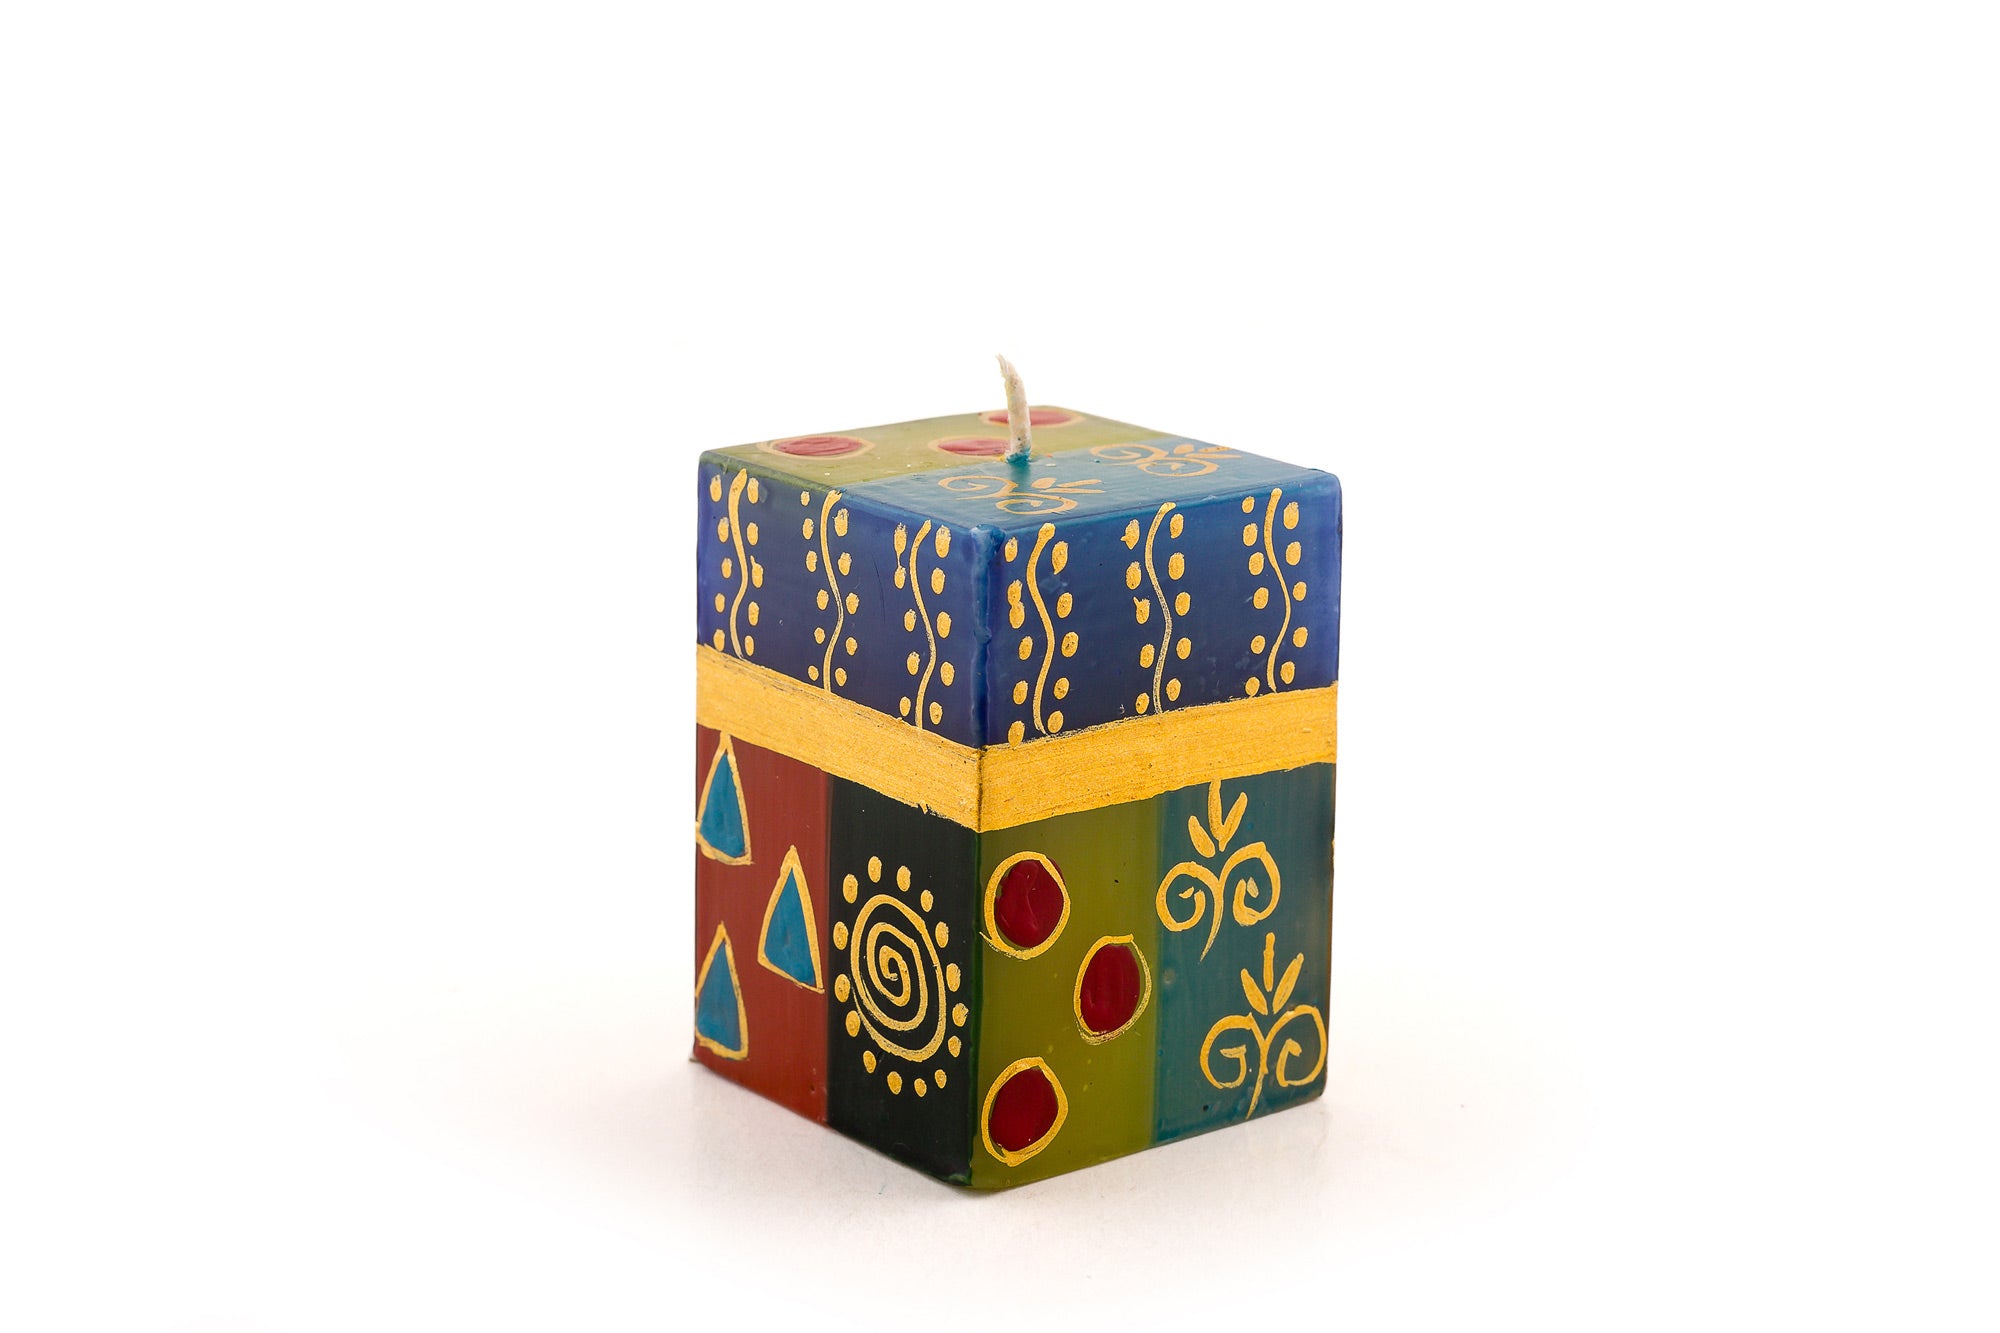 African Mineral 2x2x3 cube candle. African designs in wonderful rich colors of turquoise, red, blues, purple, and gold.